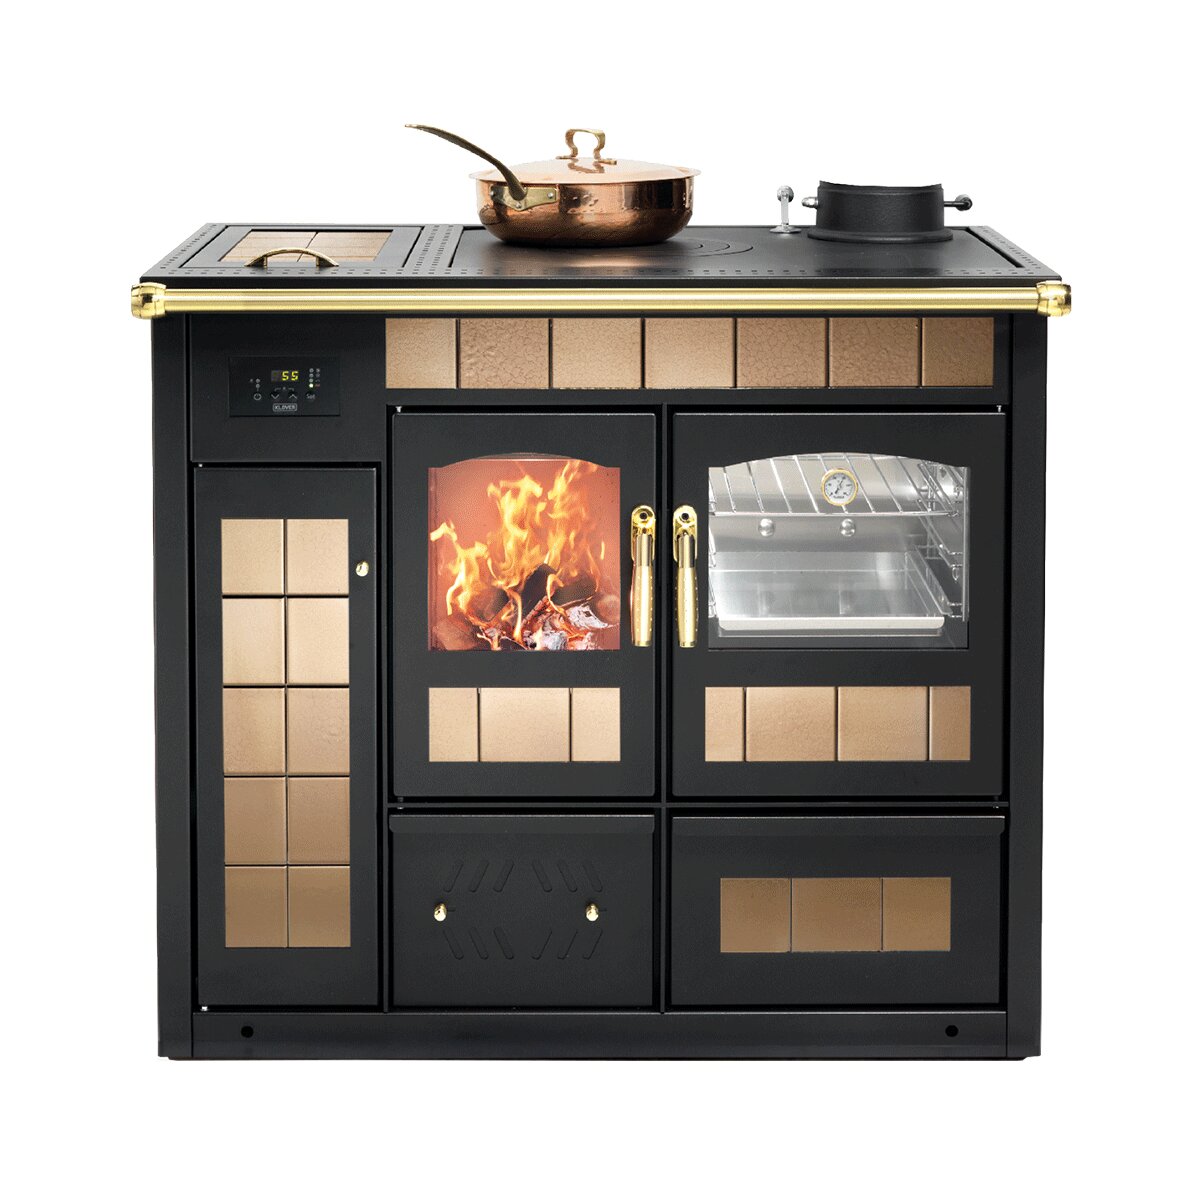 Klover STORICA wood-fired thermocooker K-KP 14 kW Idro + DHW kit